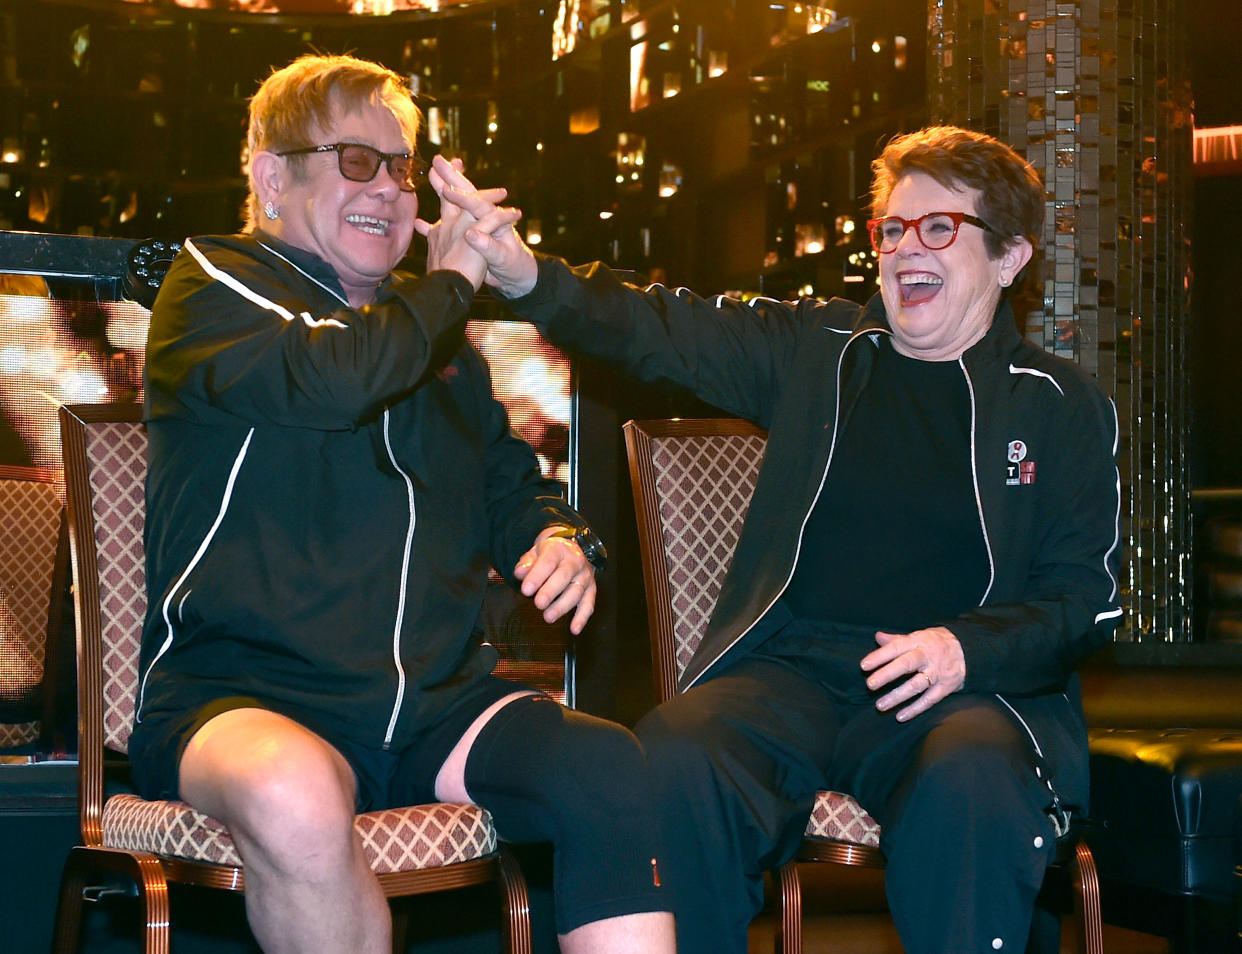 Elton John and Billie Jean King attend the live auction at the World TeamTennis Smash Hits charity tennis event benefiting the Elton John AIDS Foundation, 2016. (David Becker/Getty Images)